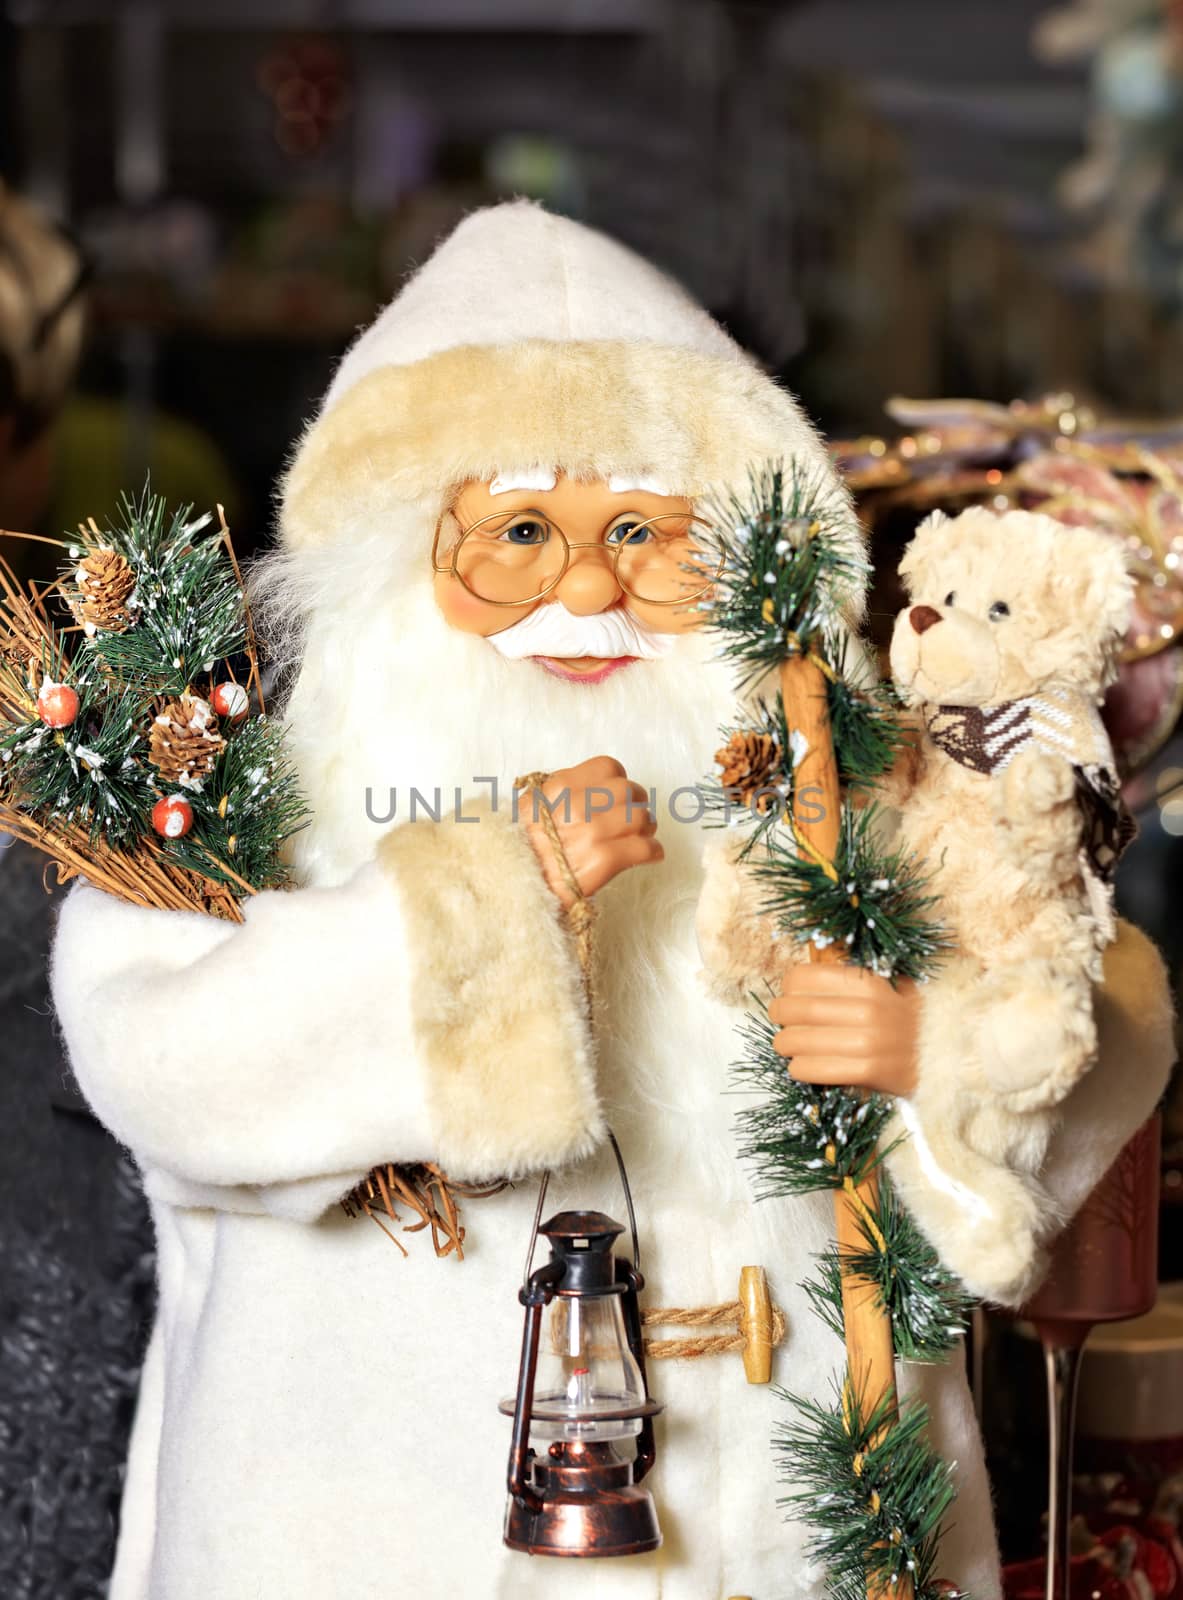 Decorative toy Santa Claus in a white fur coat with fir branches, cones, an old lamp in his hand and a little teddy bear. Marry Christmas concept.